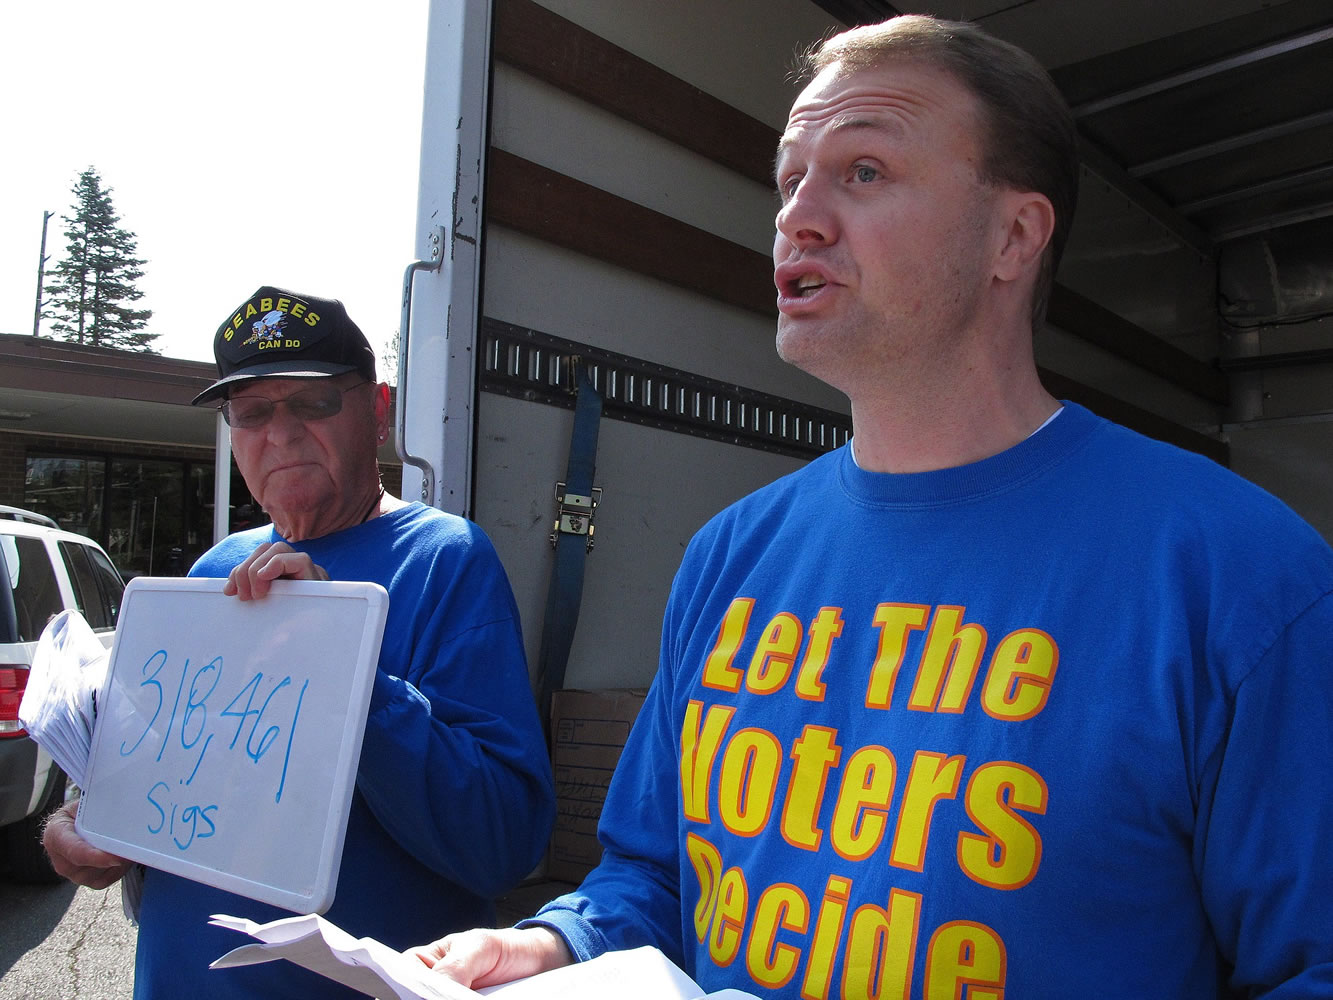 Initiative promoter Tim Eyman, right, and his partner, Jack Fagan, arrive at the state Elections Division office in 2012 to turn in signatures for an initiative in Olympia.